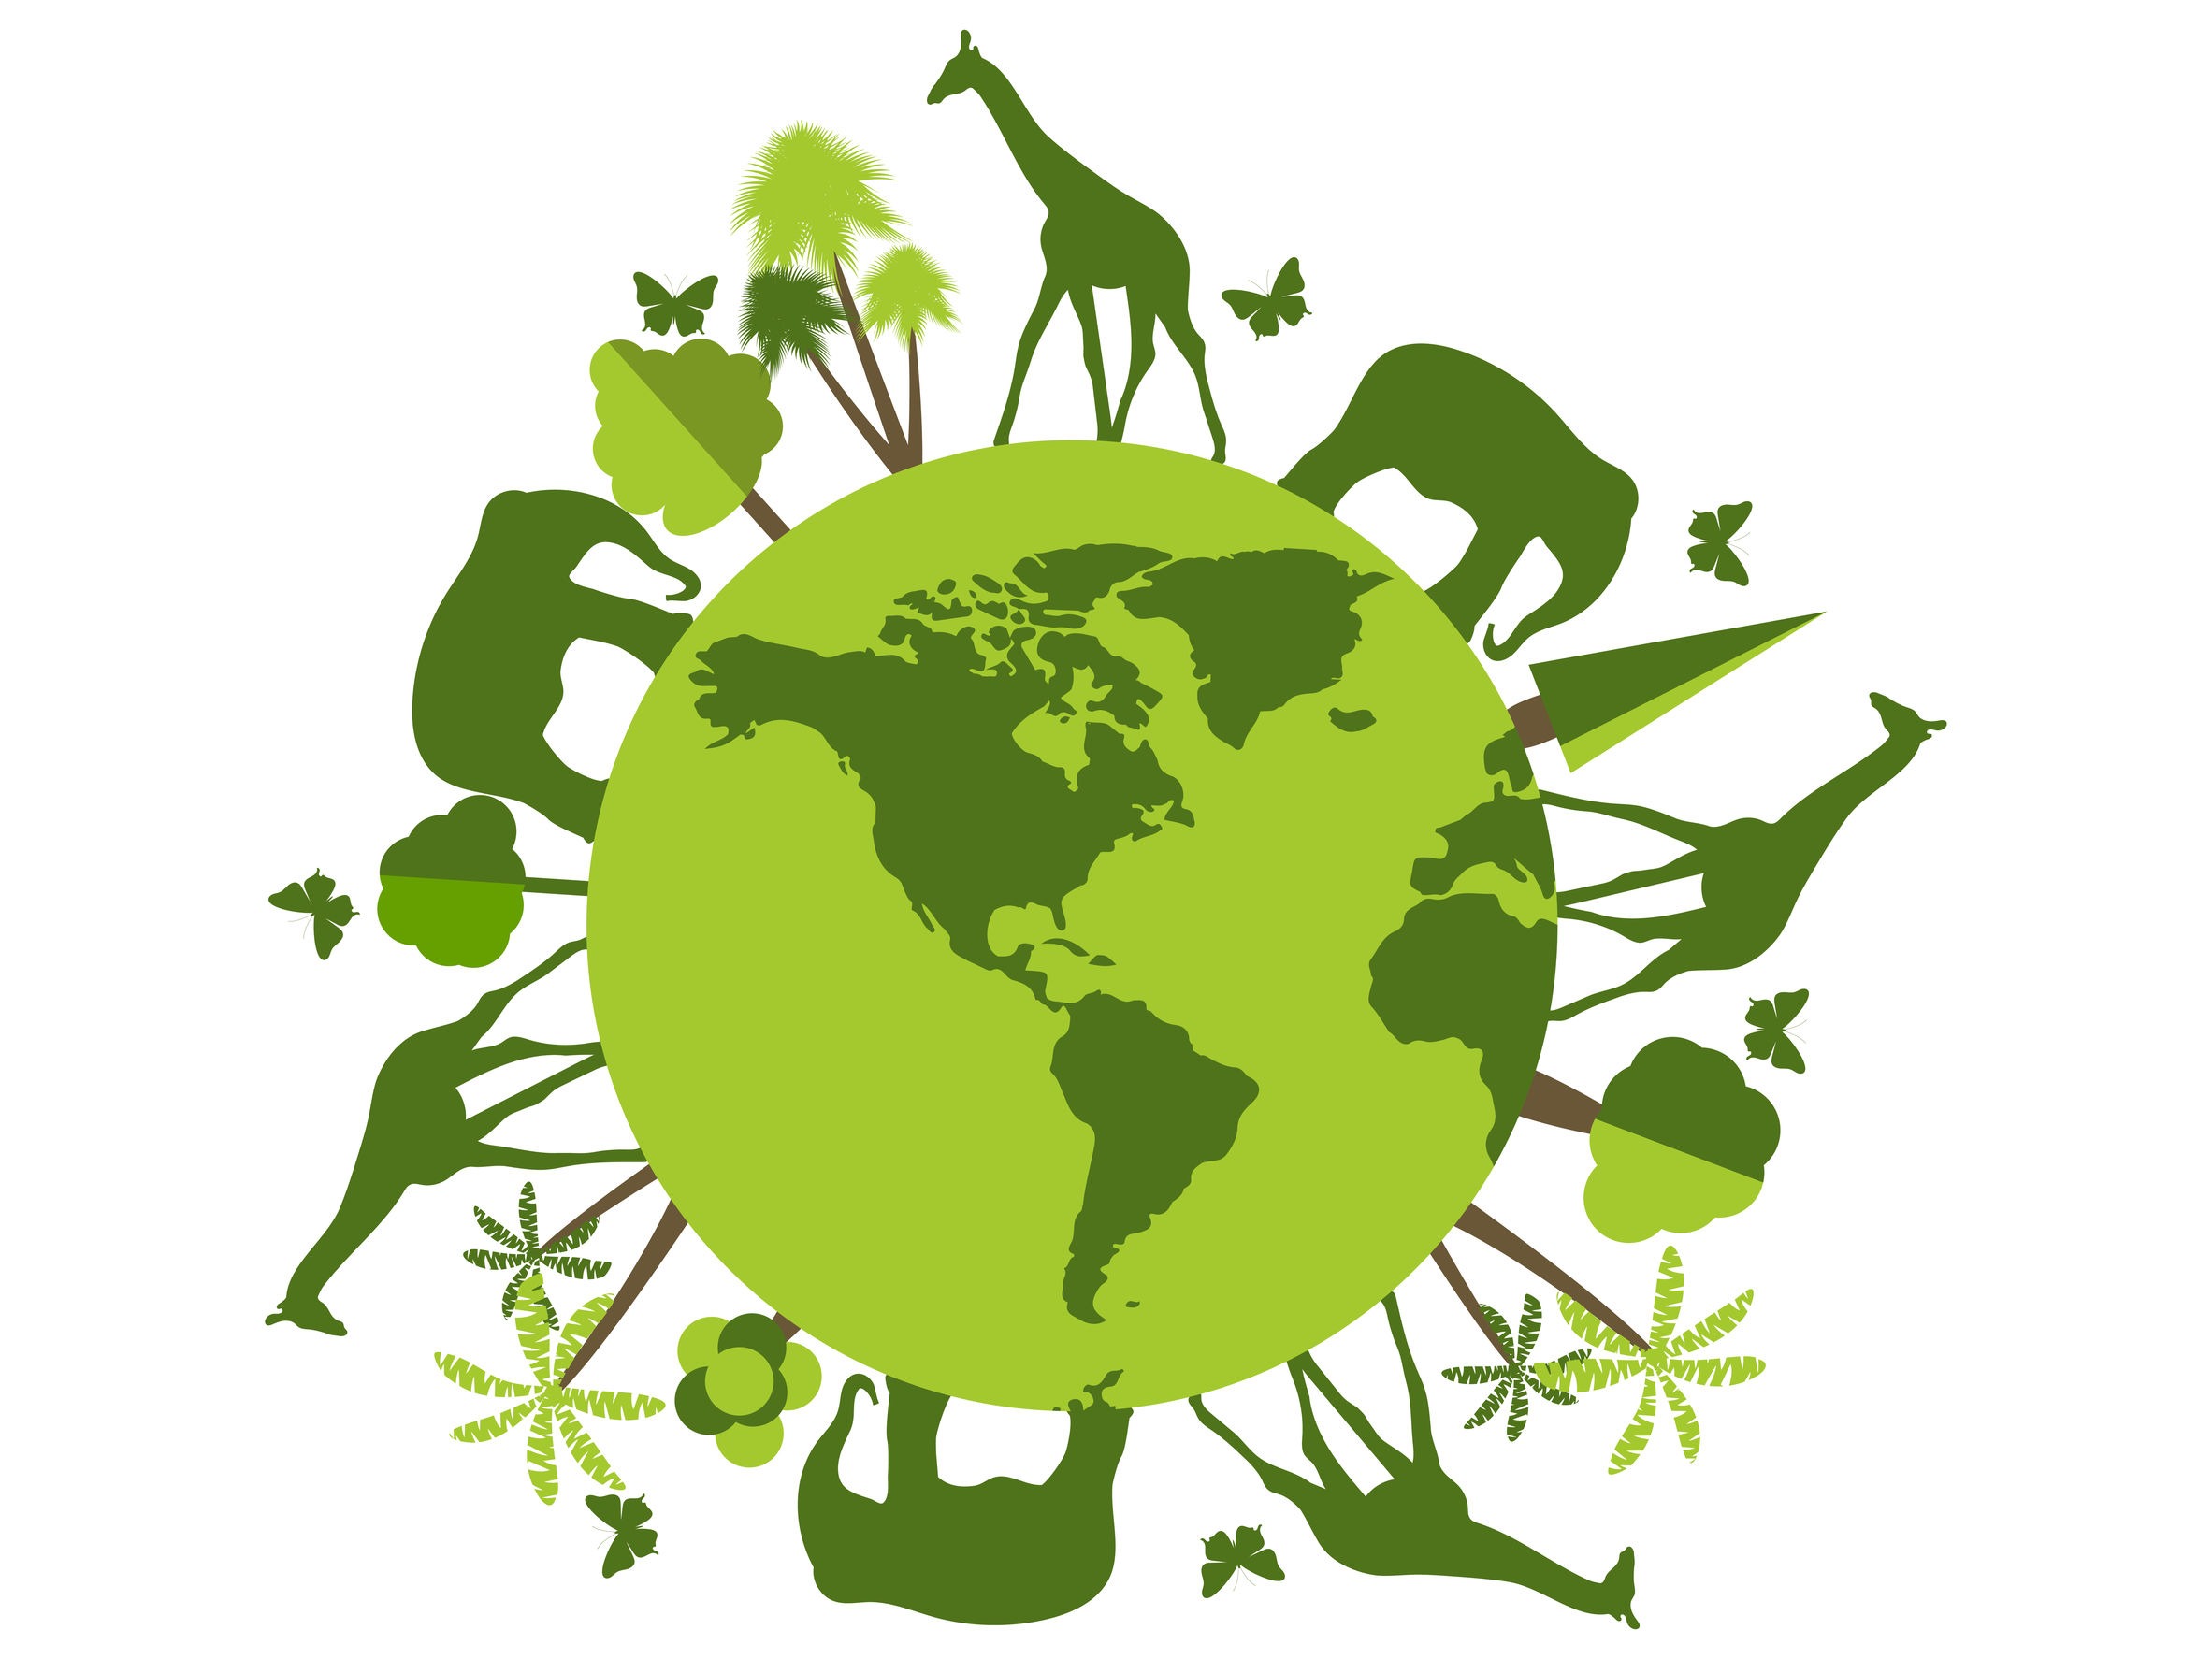 earth-day-greenwashing-messages-tip